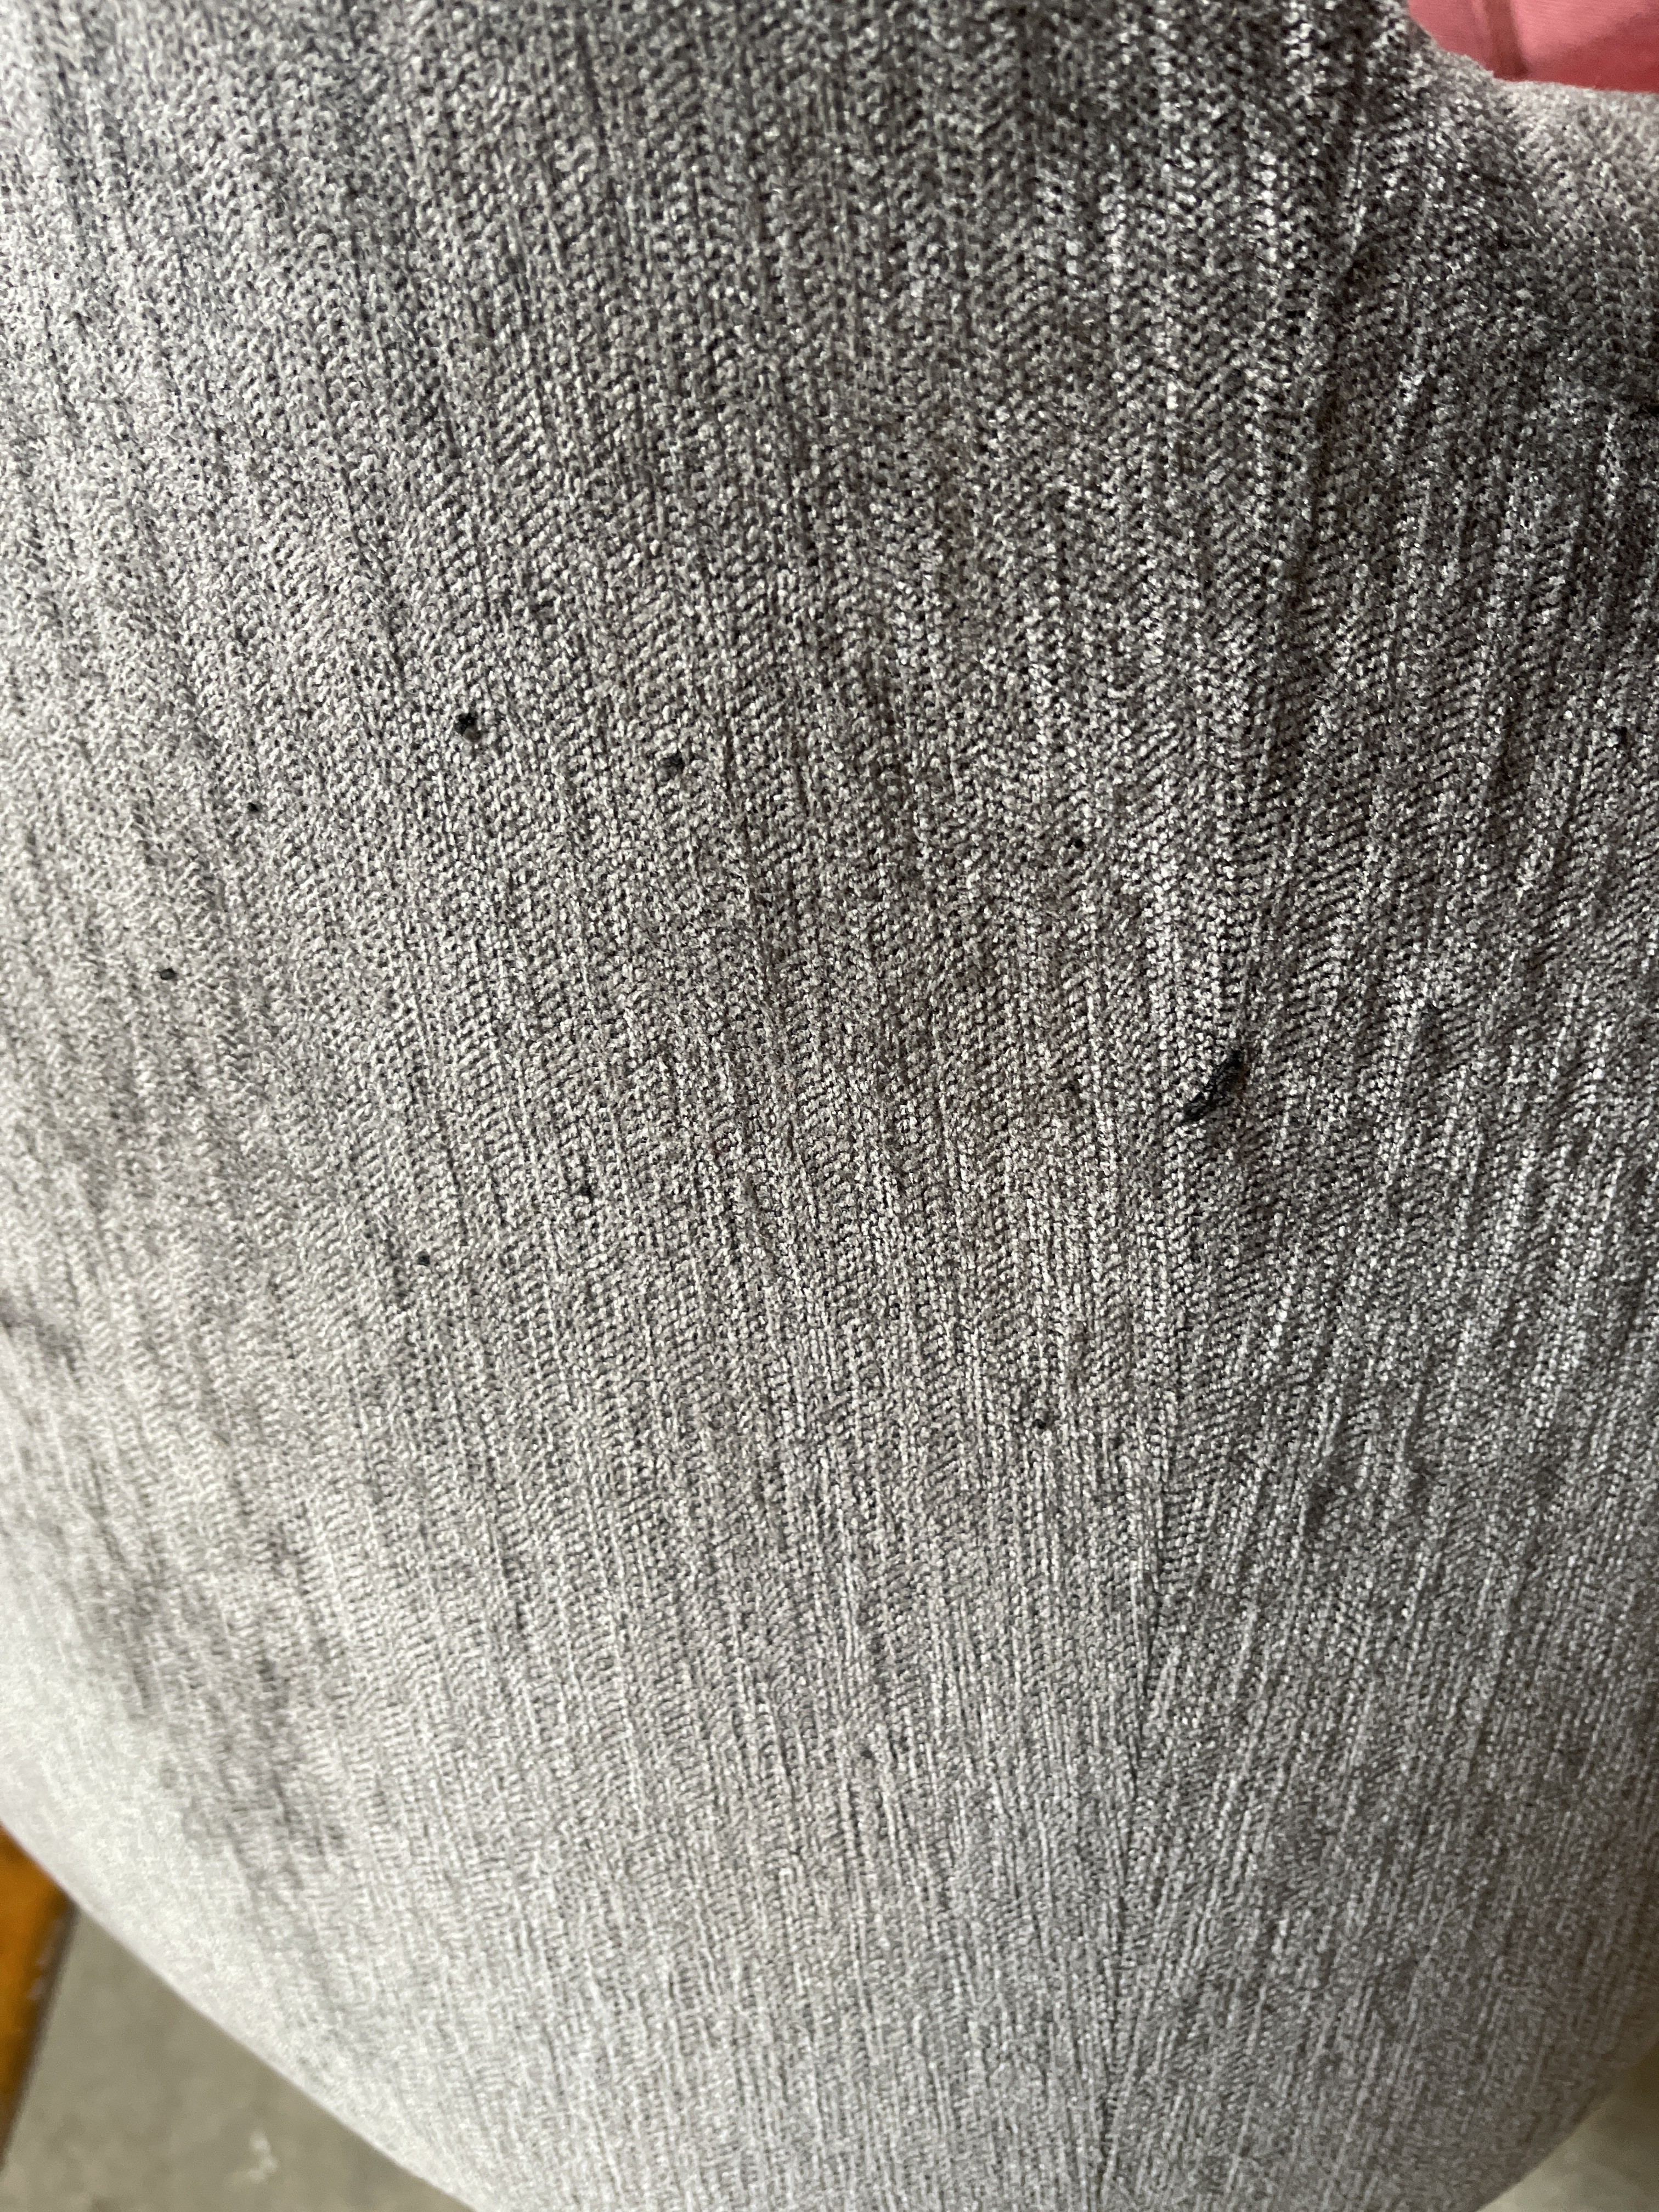 a close up of a person's leg with a piece of clothing on it